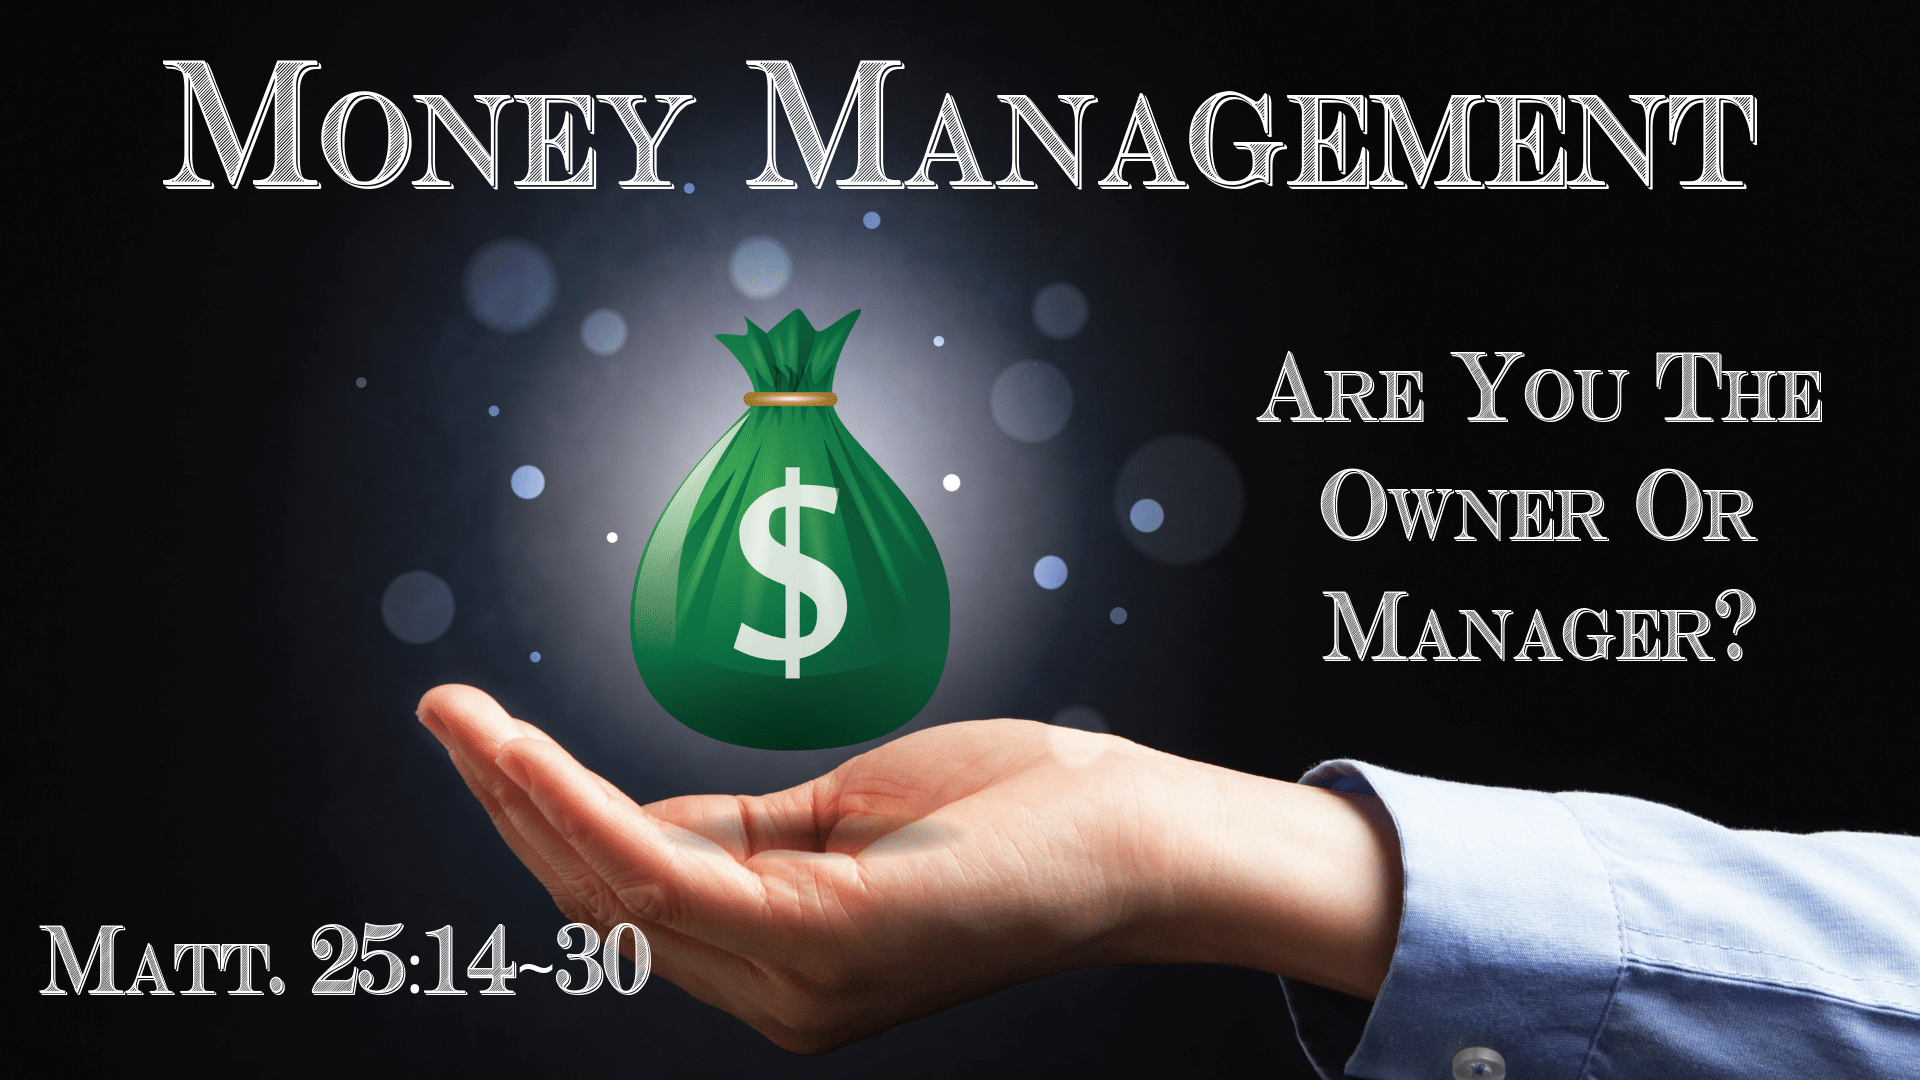 Money Management: Are You The Owner or Manager?